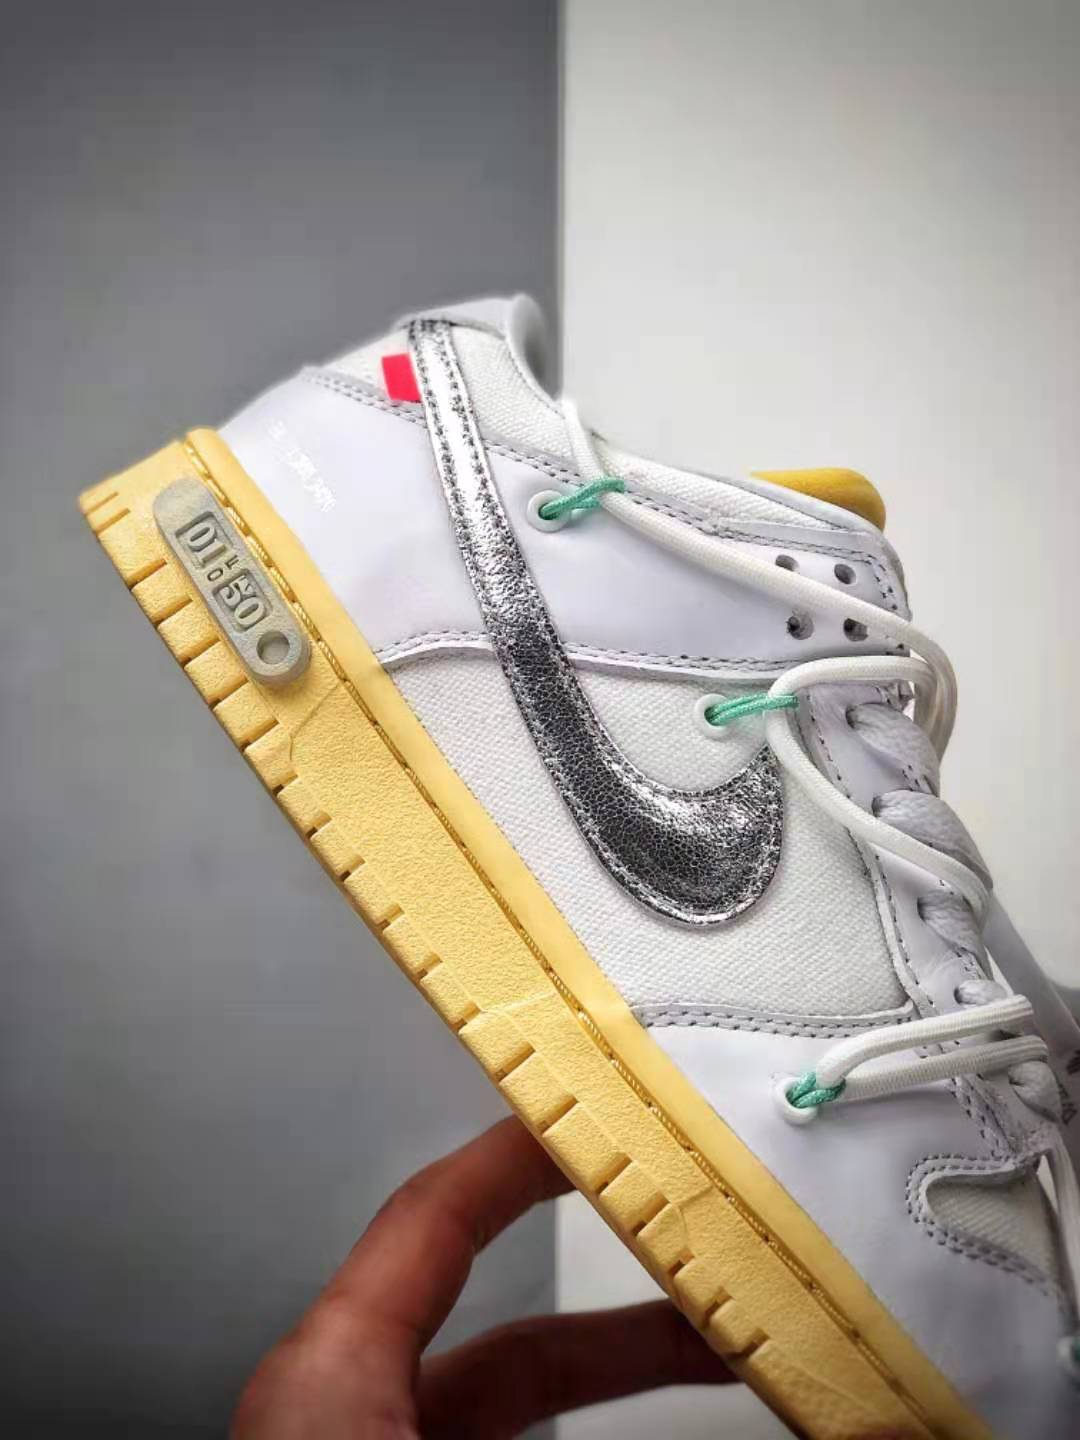 Off-White x Nike SB Dunk Low White Metallic Silver Yellow DM1602-127 - Limited Edition Collaboration Sneakers